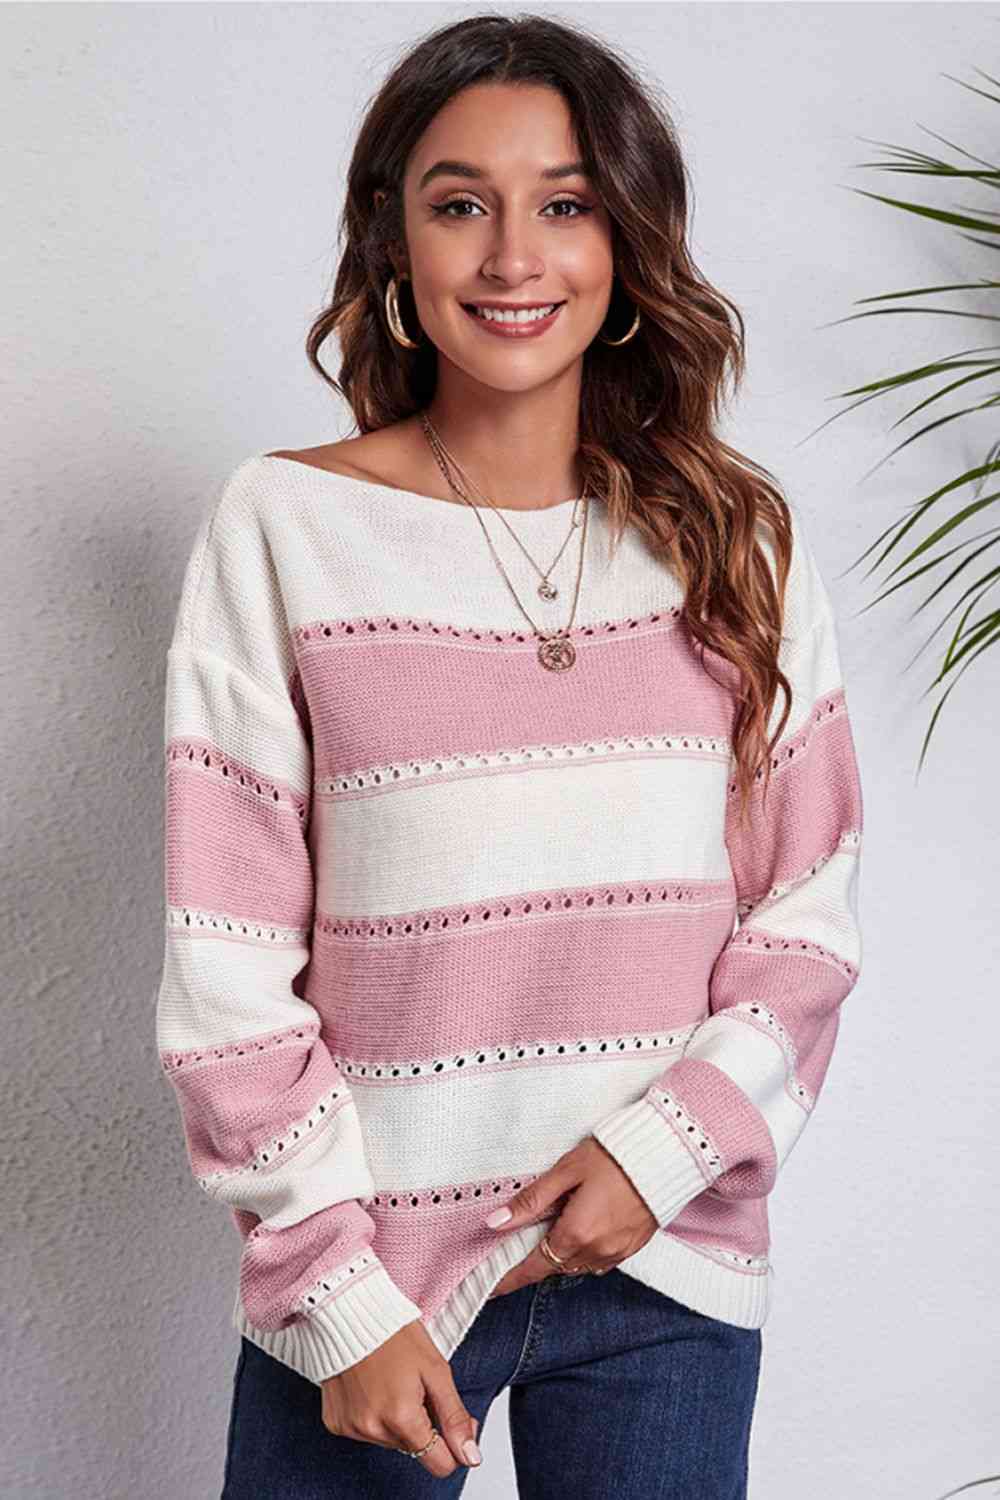 Striped Boat Neck Dropped Shoulder Sweater (4 Colors) Shirts & Tops Krazy Heart Designs Boutique Blush Pink S 